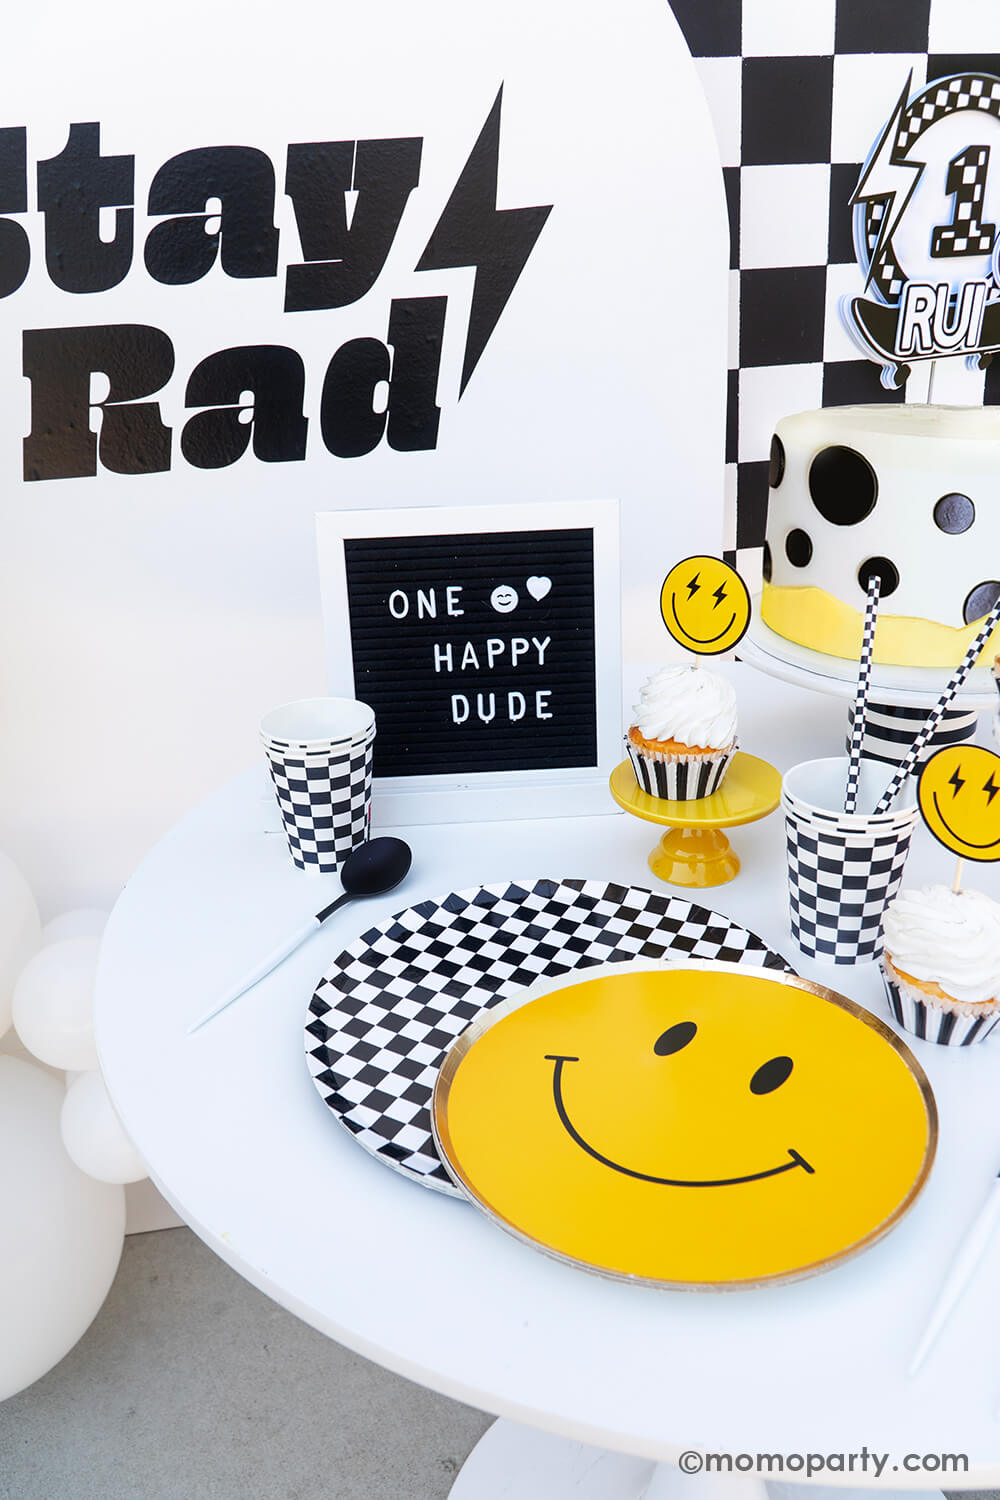 Baby boy's "One Happy Dude" first birthday party tablescape by Momo Party. Featuring the classic black and white checkered patterned plates, cups, napkins and smiley face plates, this rad party table decoration is perfect for your little cool dude's very first big day! With a mix of cool dude aesthetics, smiley-face accents, and checkered patterns in black and white, we've got the perfect recipe for a memorable boy's birthday bash. Don't miss out on making this party as special as your little boy.